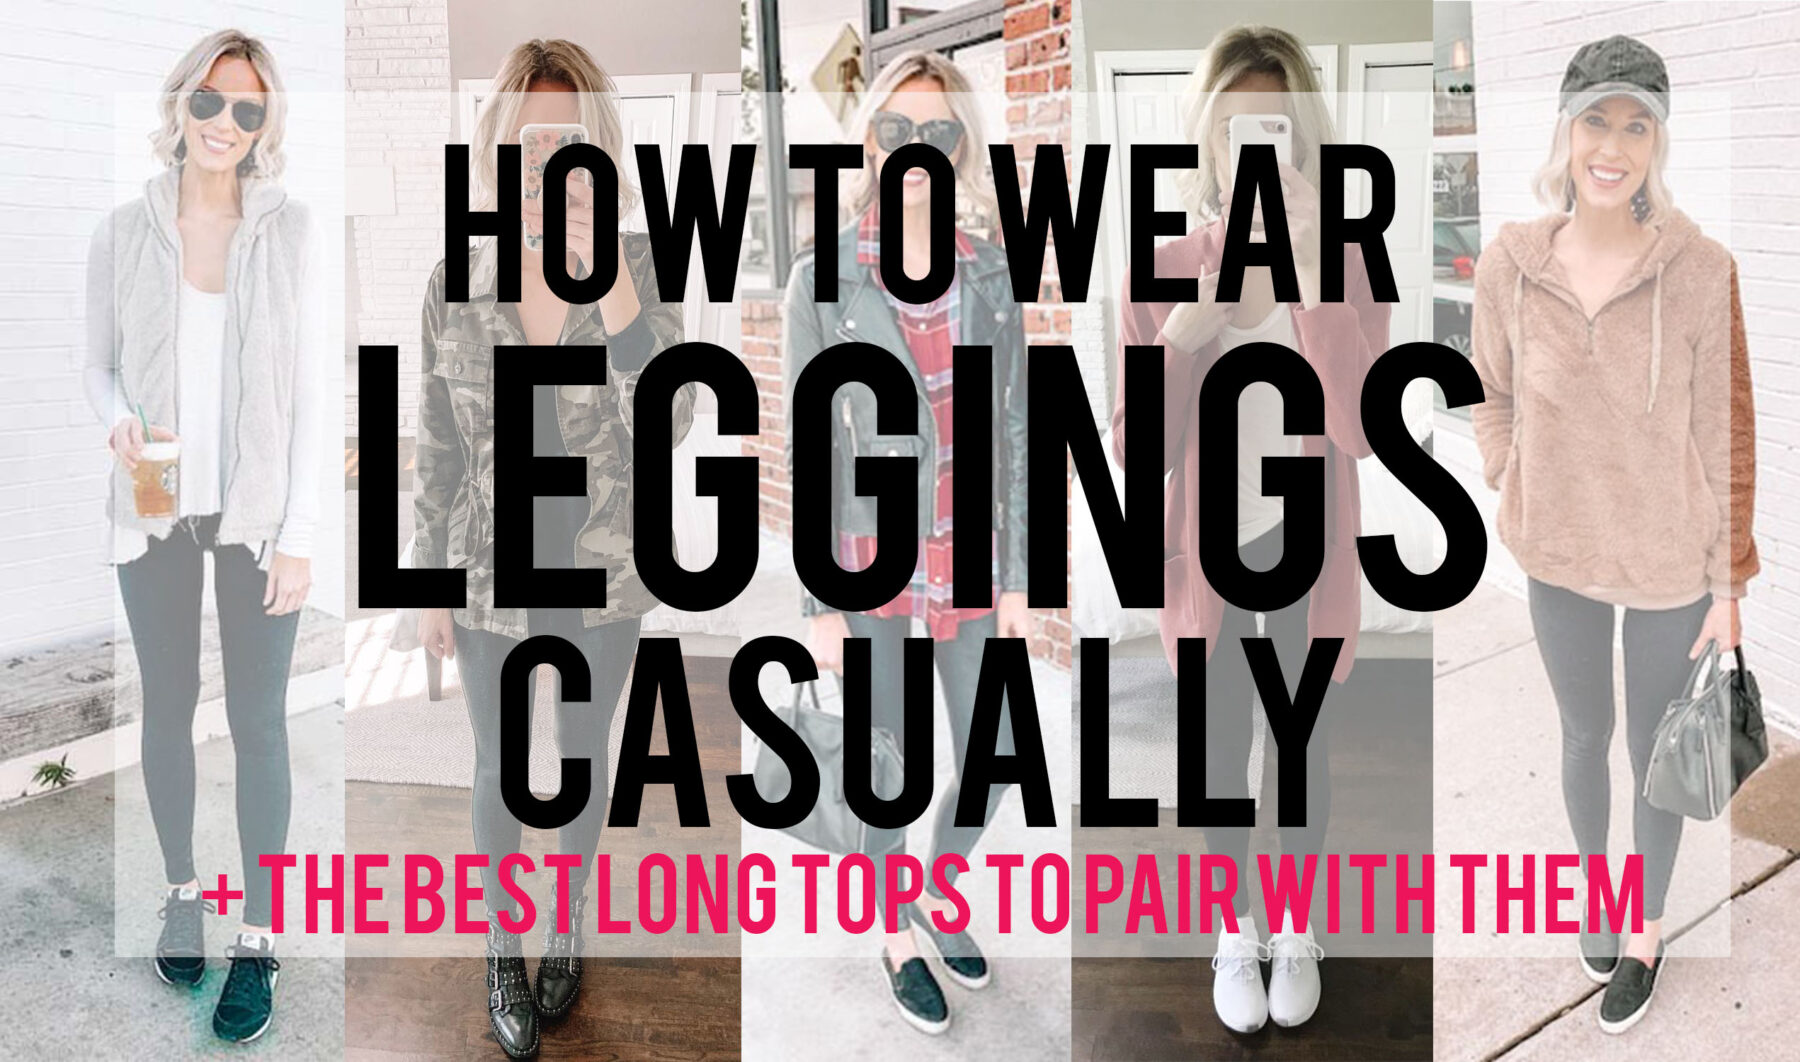 How to Wear Leggings Casually and the 